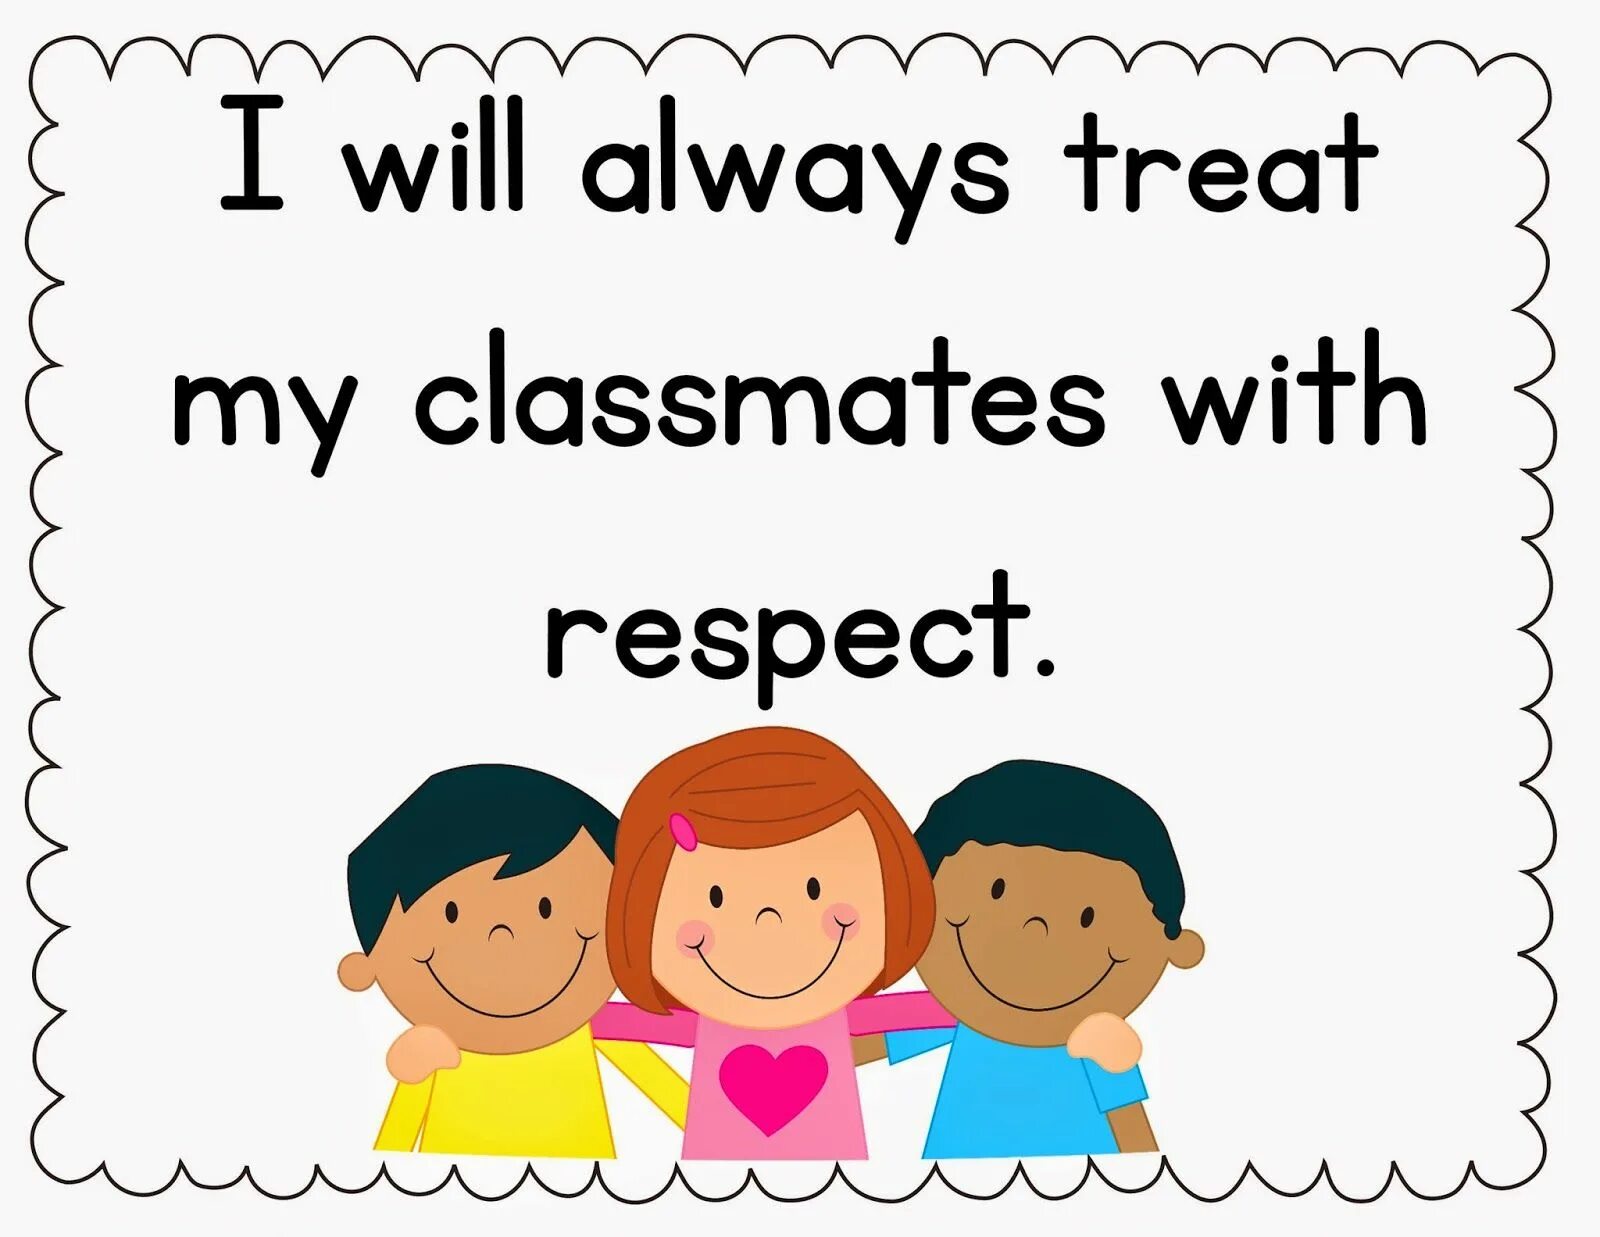 What your classmates doing. Classroom Rules. Classroom Rules Kindergarten. Class Rules Kindergarten. Classroom Rules respect.